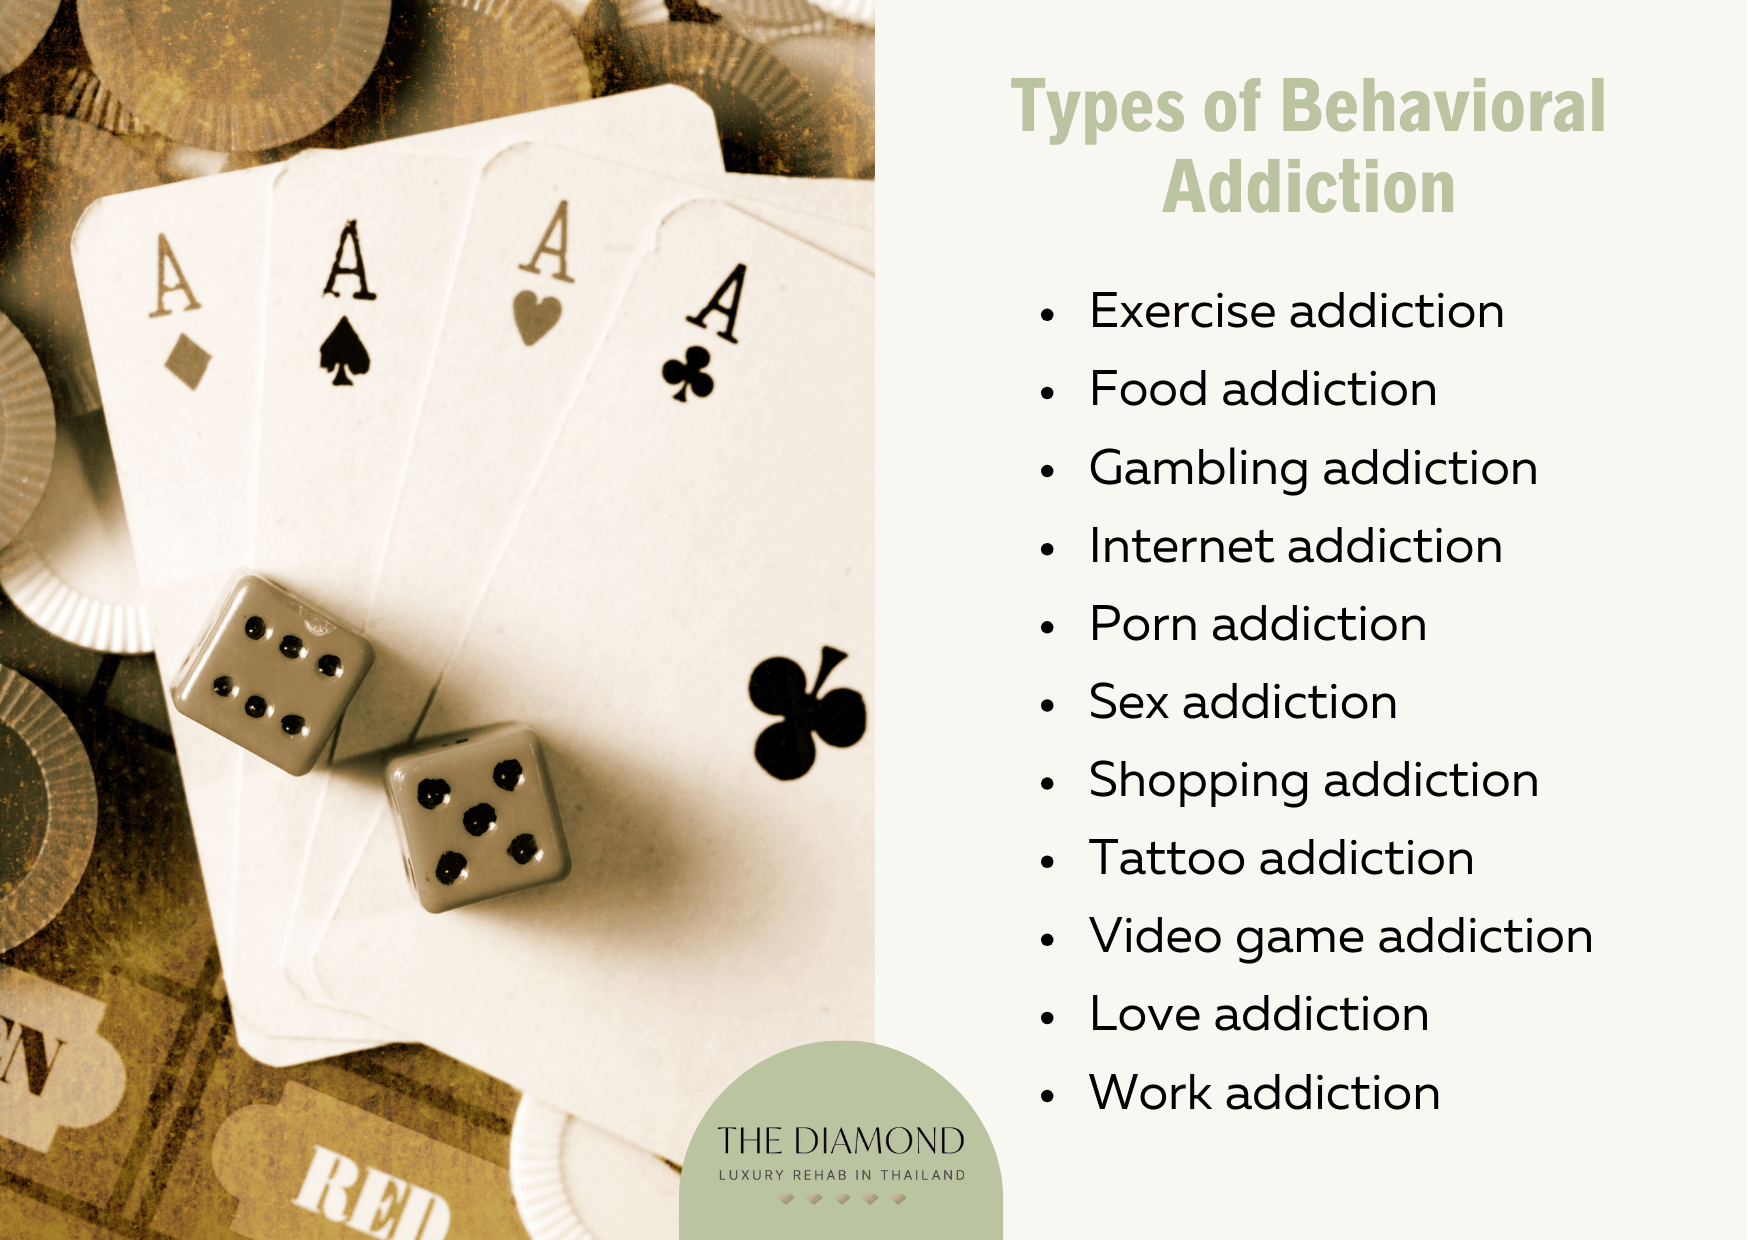 what are the types of Behavioral addiction